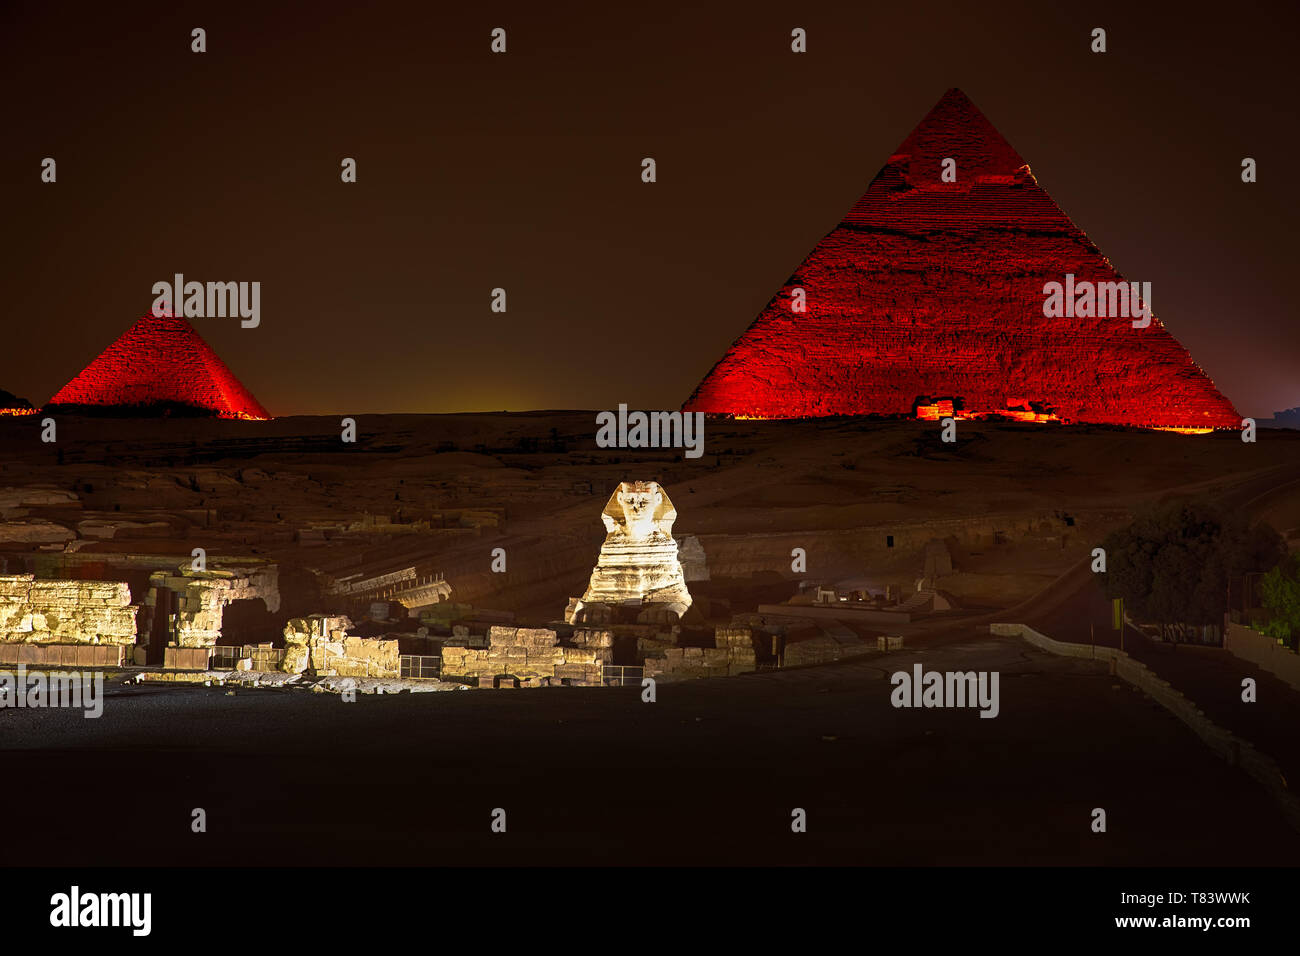 Night view on the enlighted Pyramids of Giza, Egypt Stock Photo